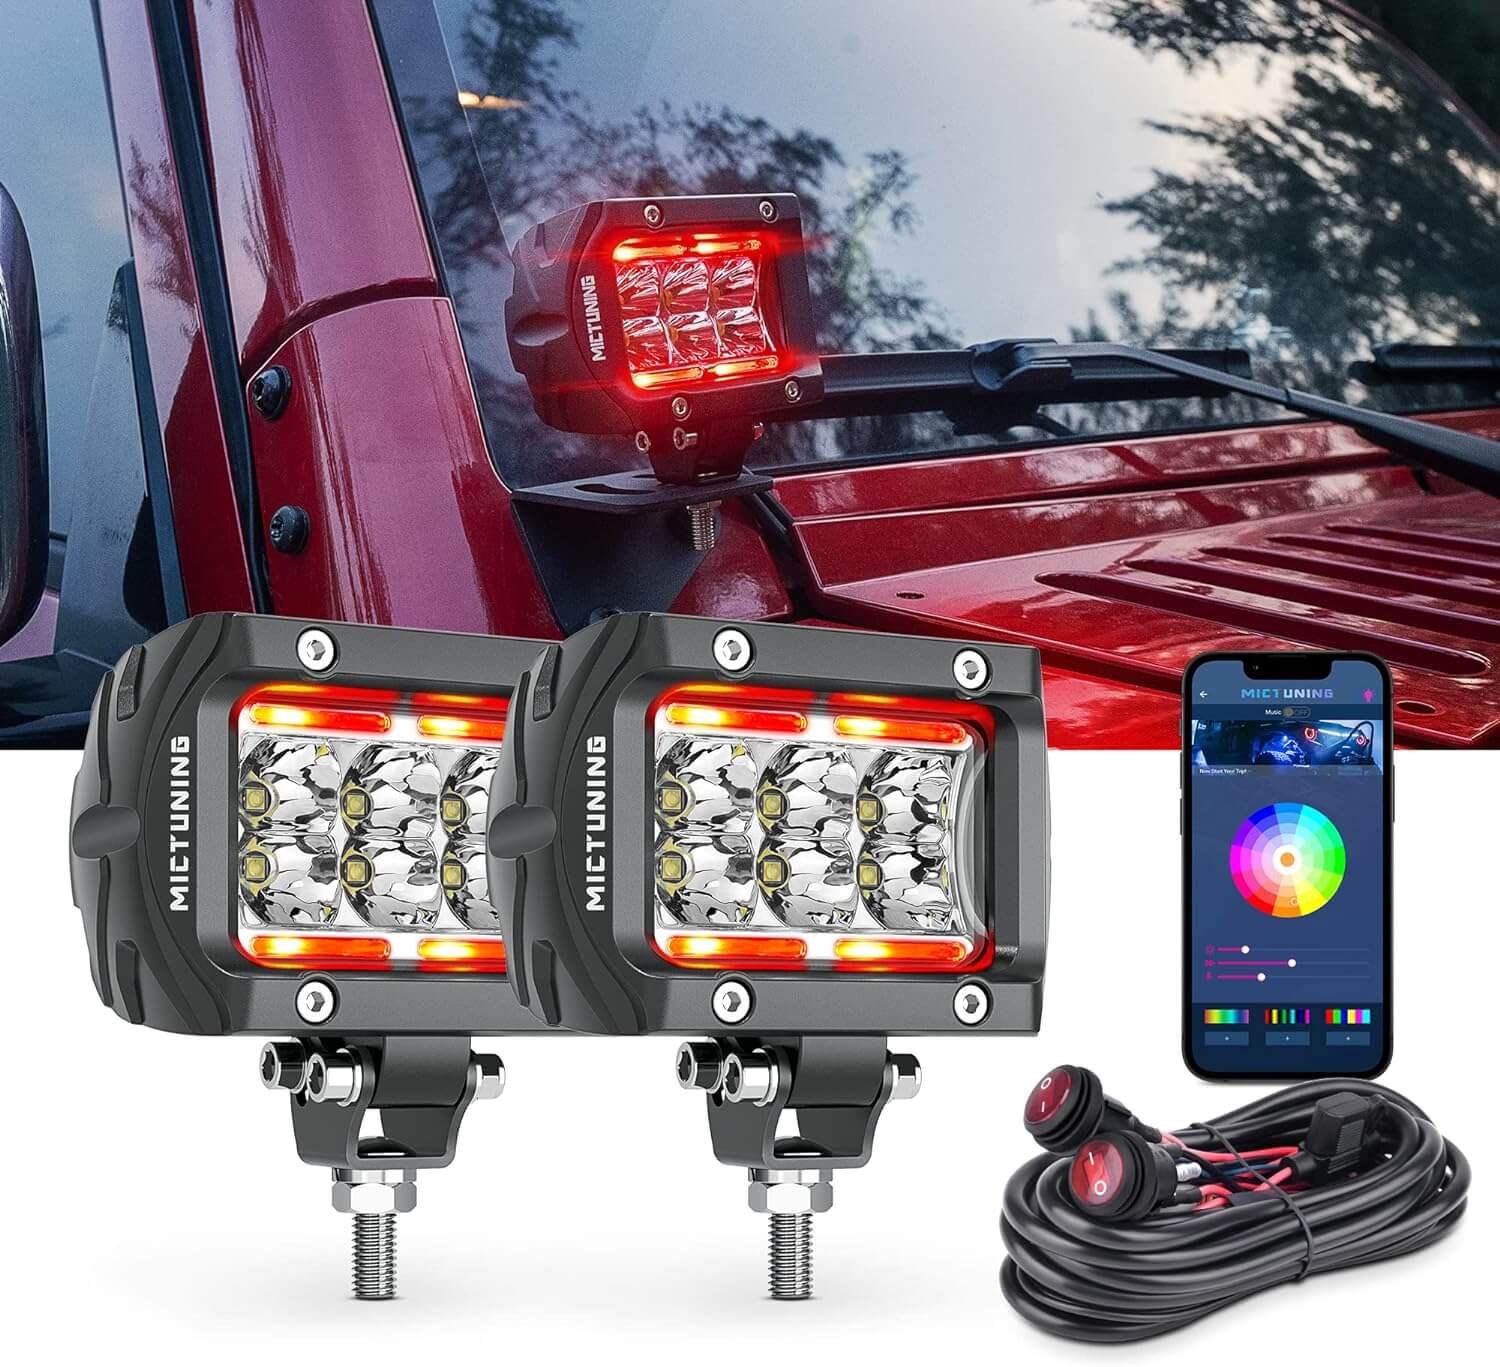 K1 RGBW LED Pods Light Atmosphere Light 2pcs - 4 Inch 18W Off Road Combo Driving Lights with APP, Control Box